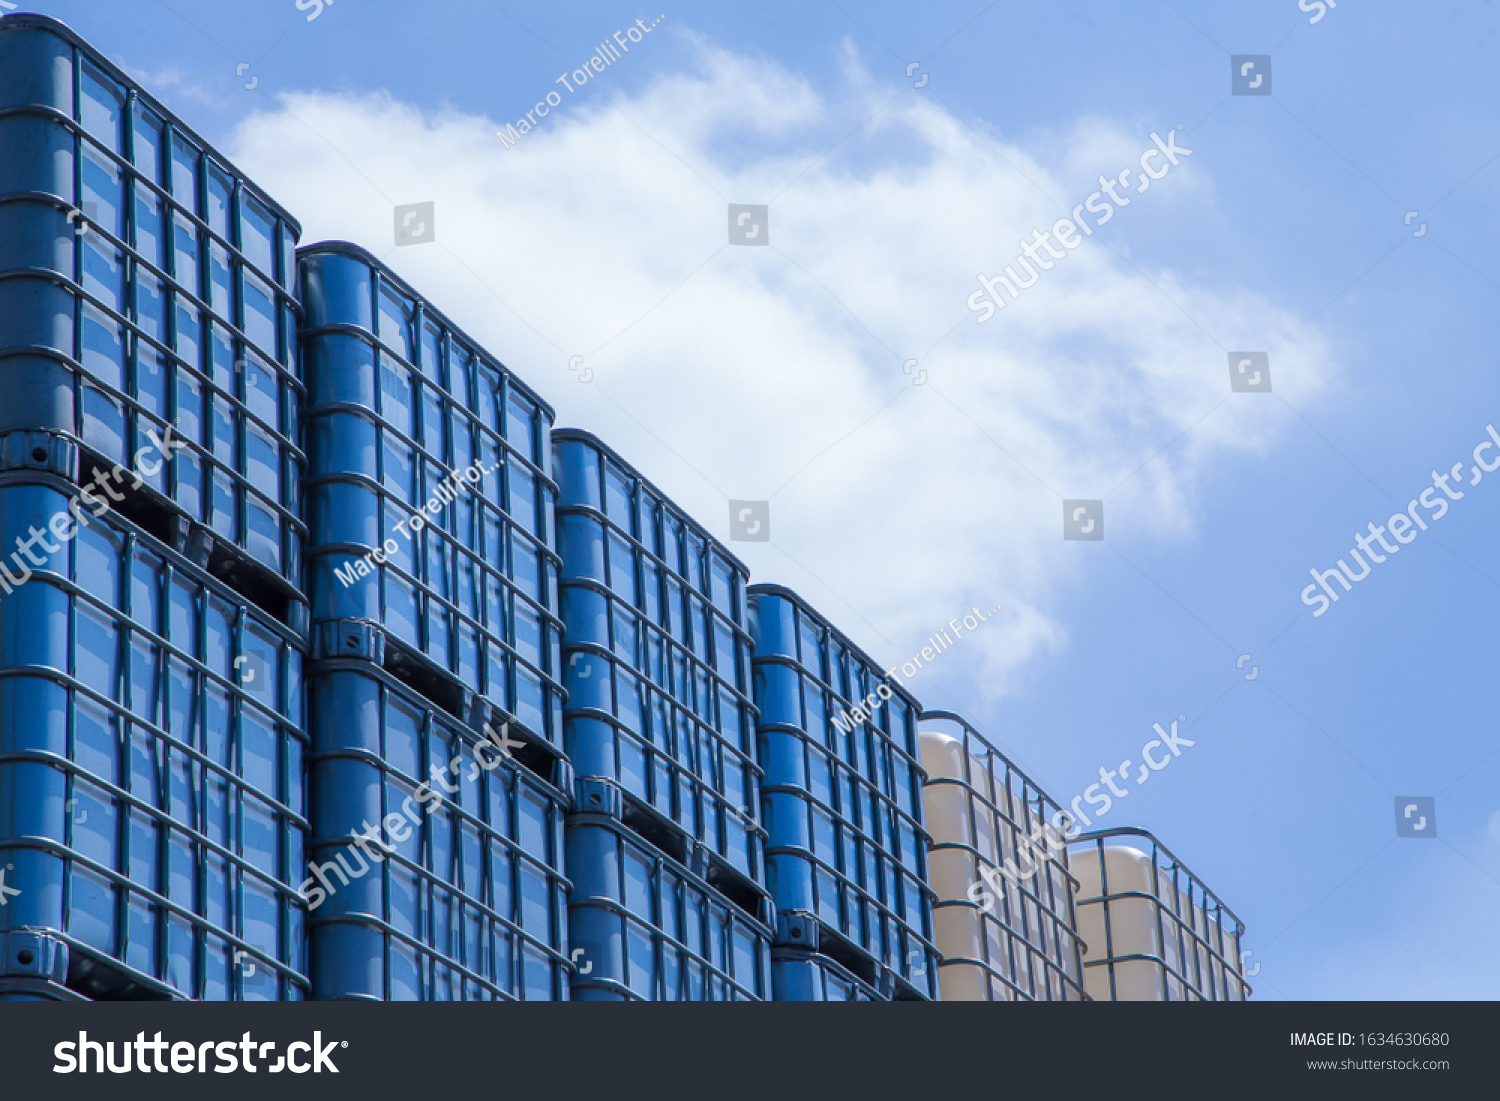 Huge industrial IBC outdoor storage with blue sky above. #1634630680